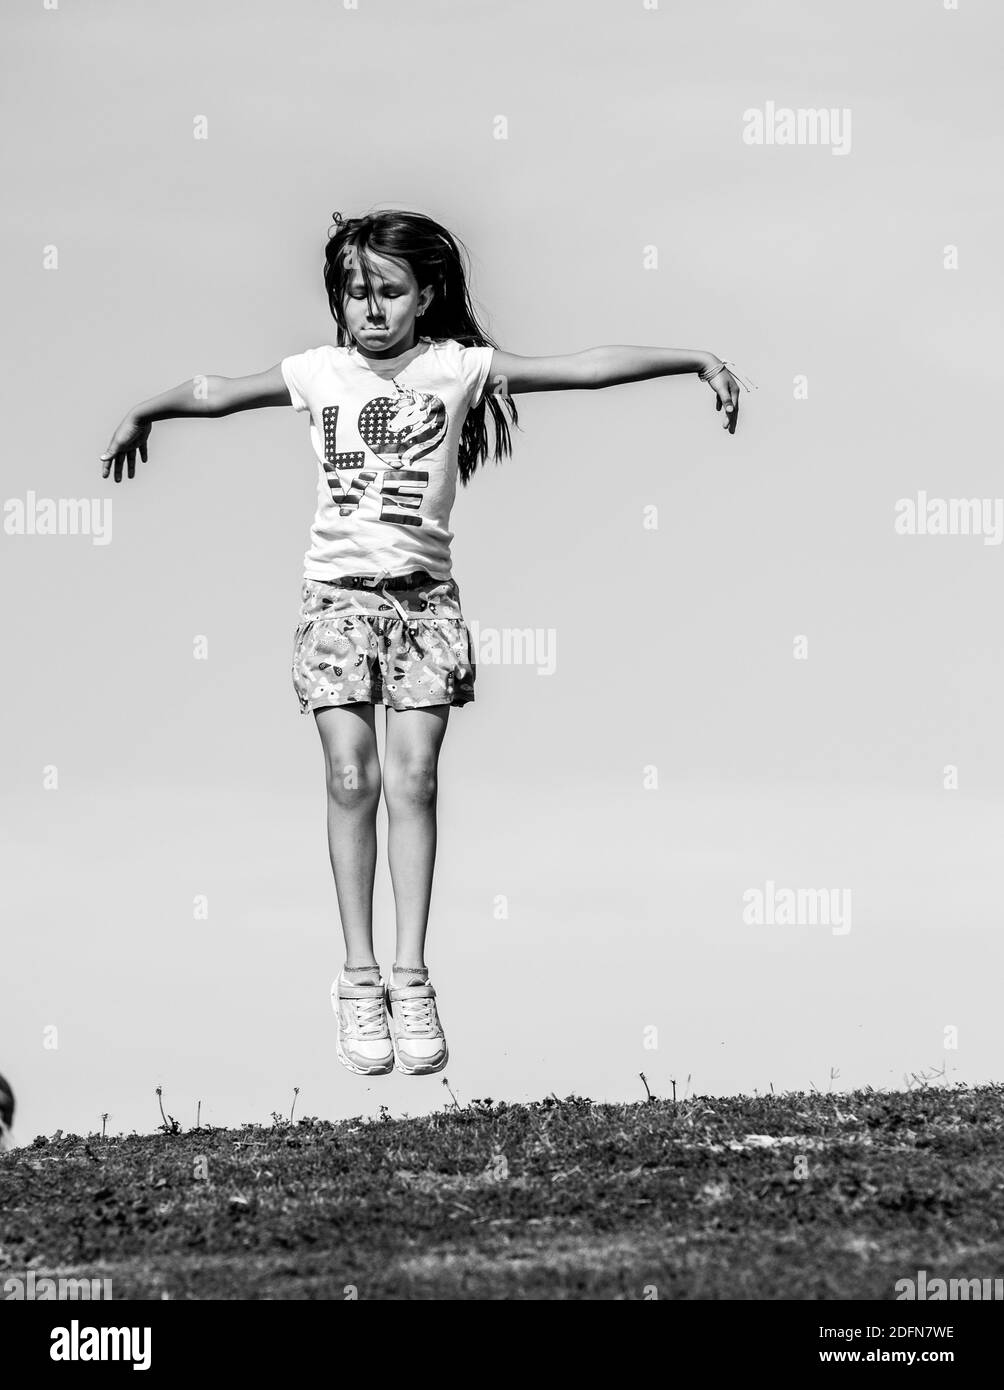 girl jumping in the air at a park Stock Photo